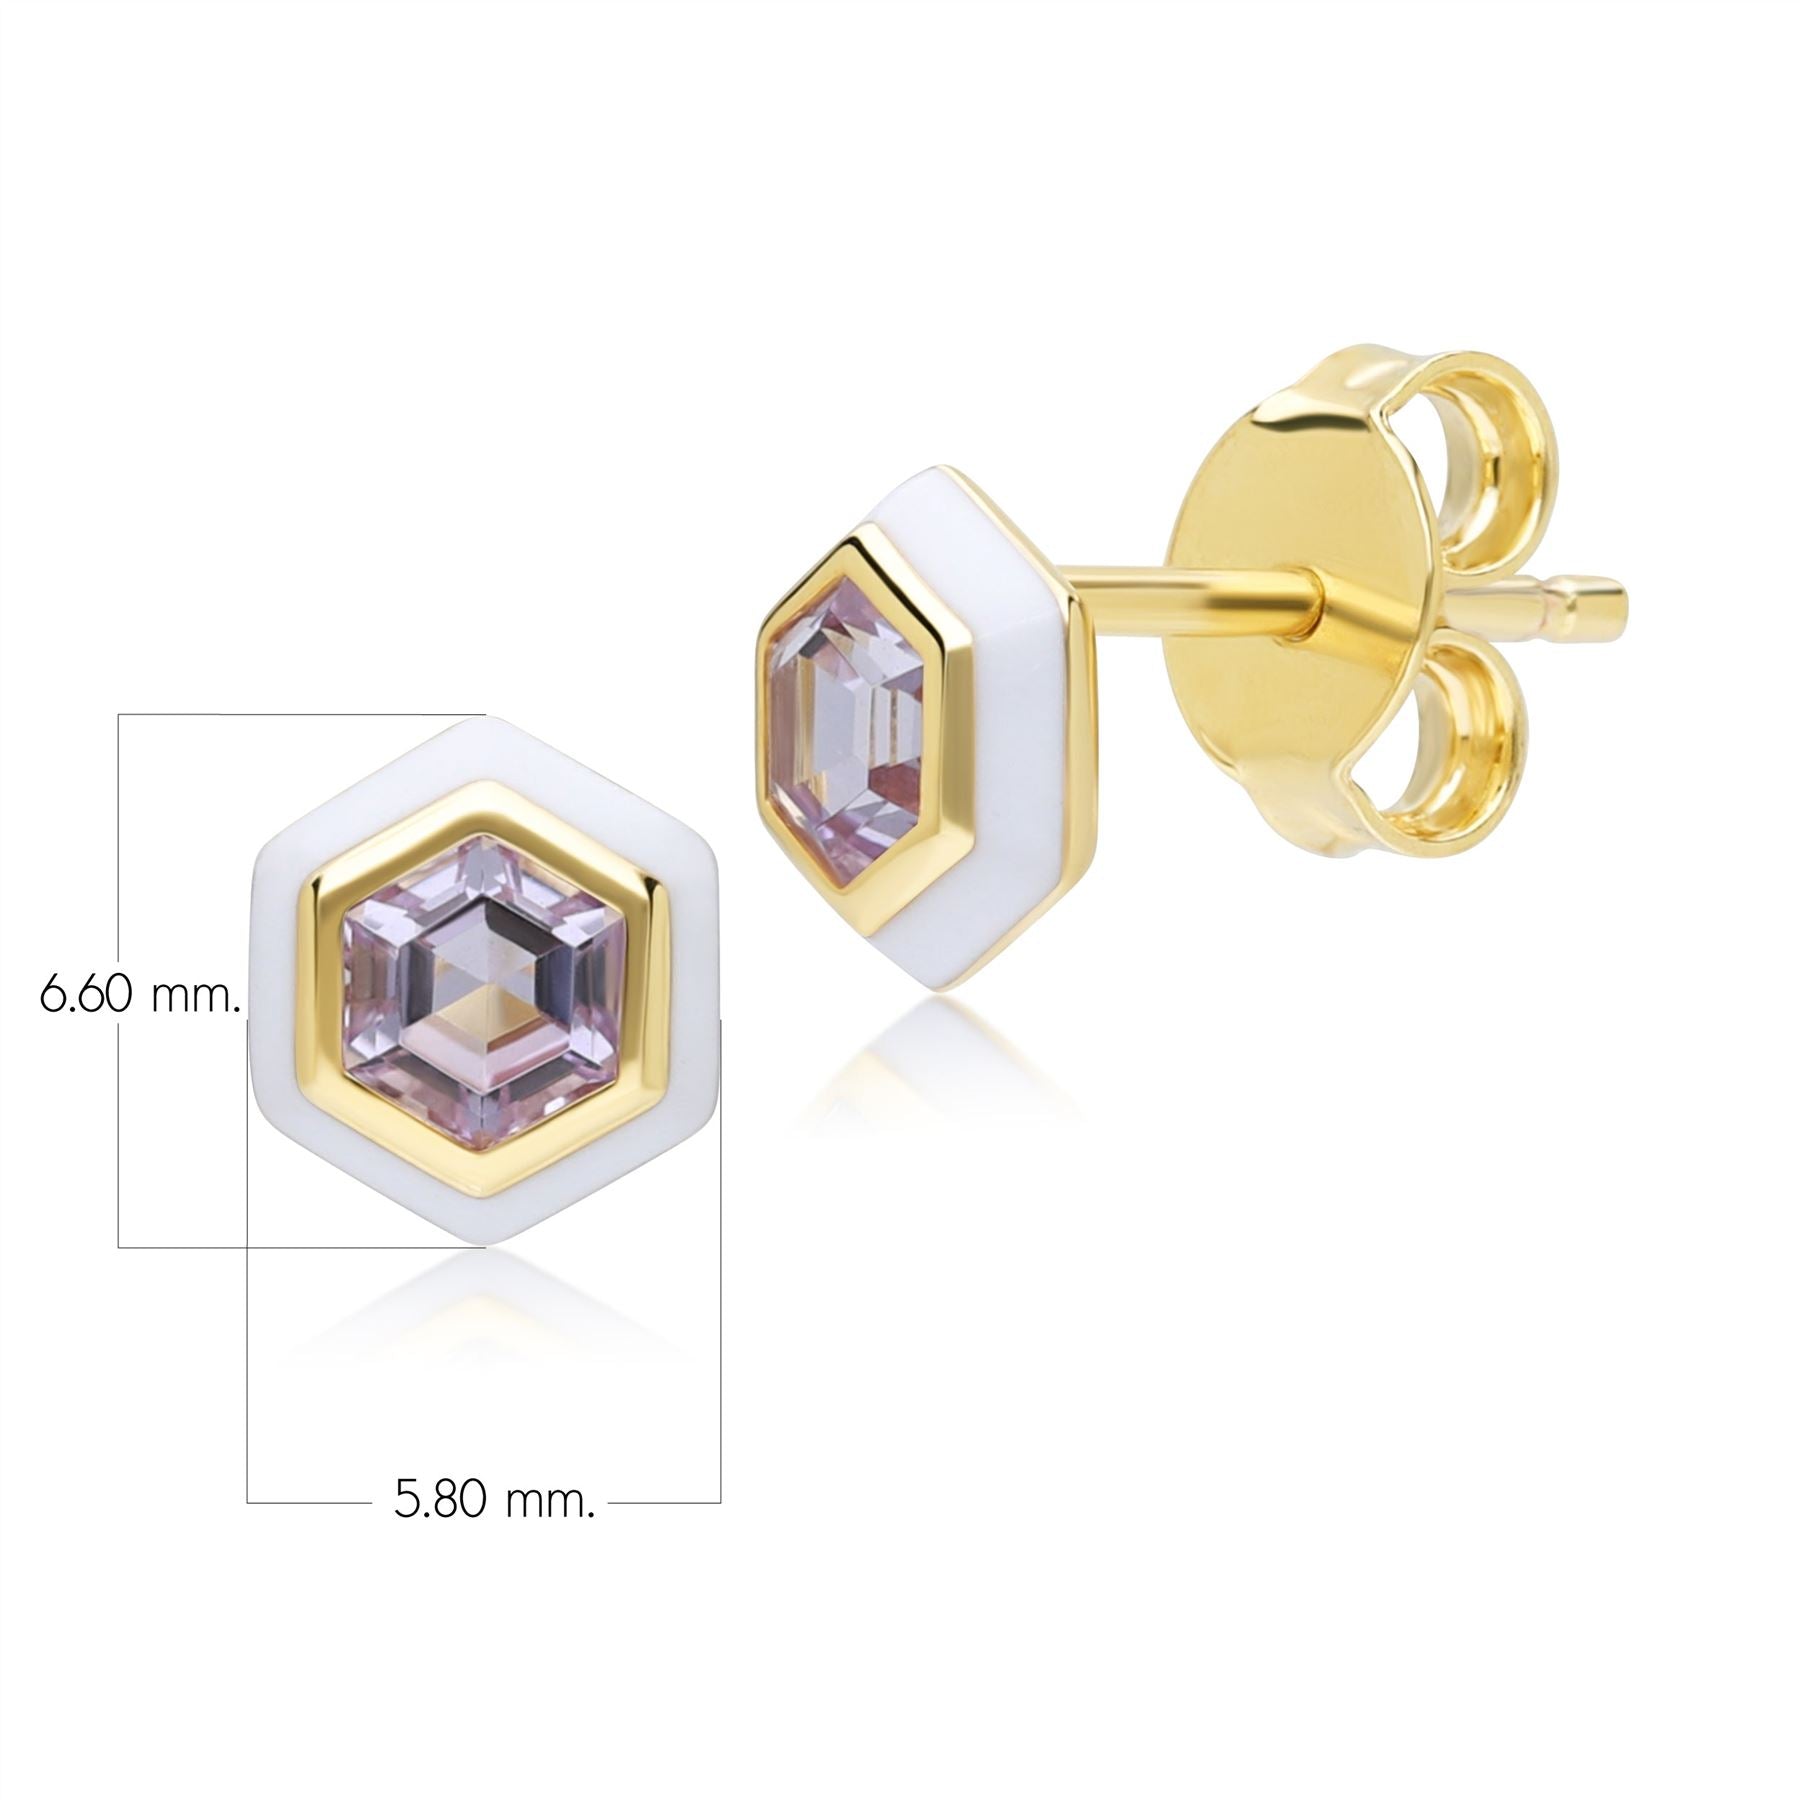 Geometric Hex Pink Amethyst and White Enamel Stud Earrings in Gold Plated Sterling Silver Dimensions 